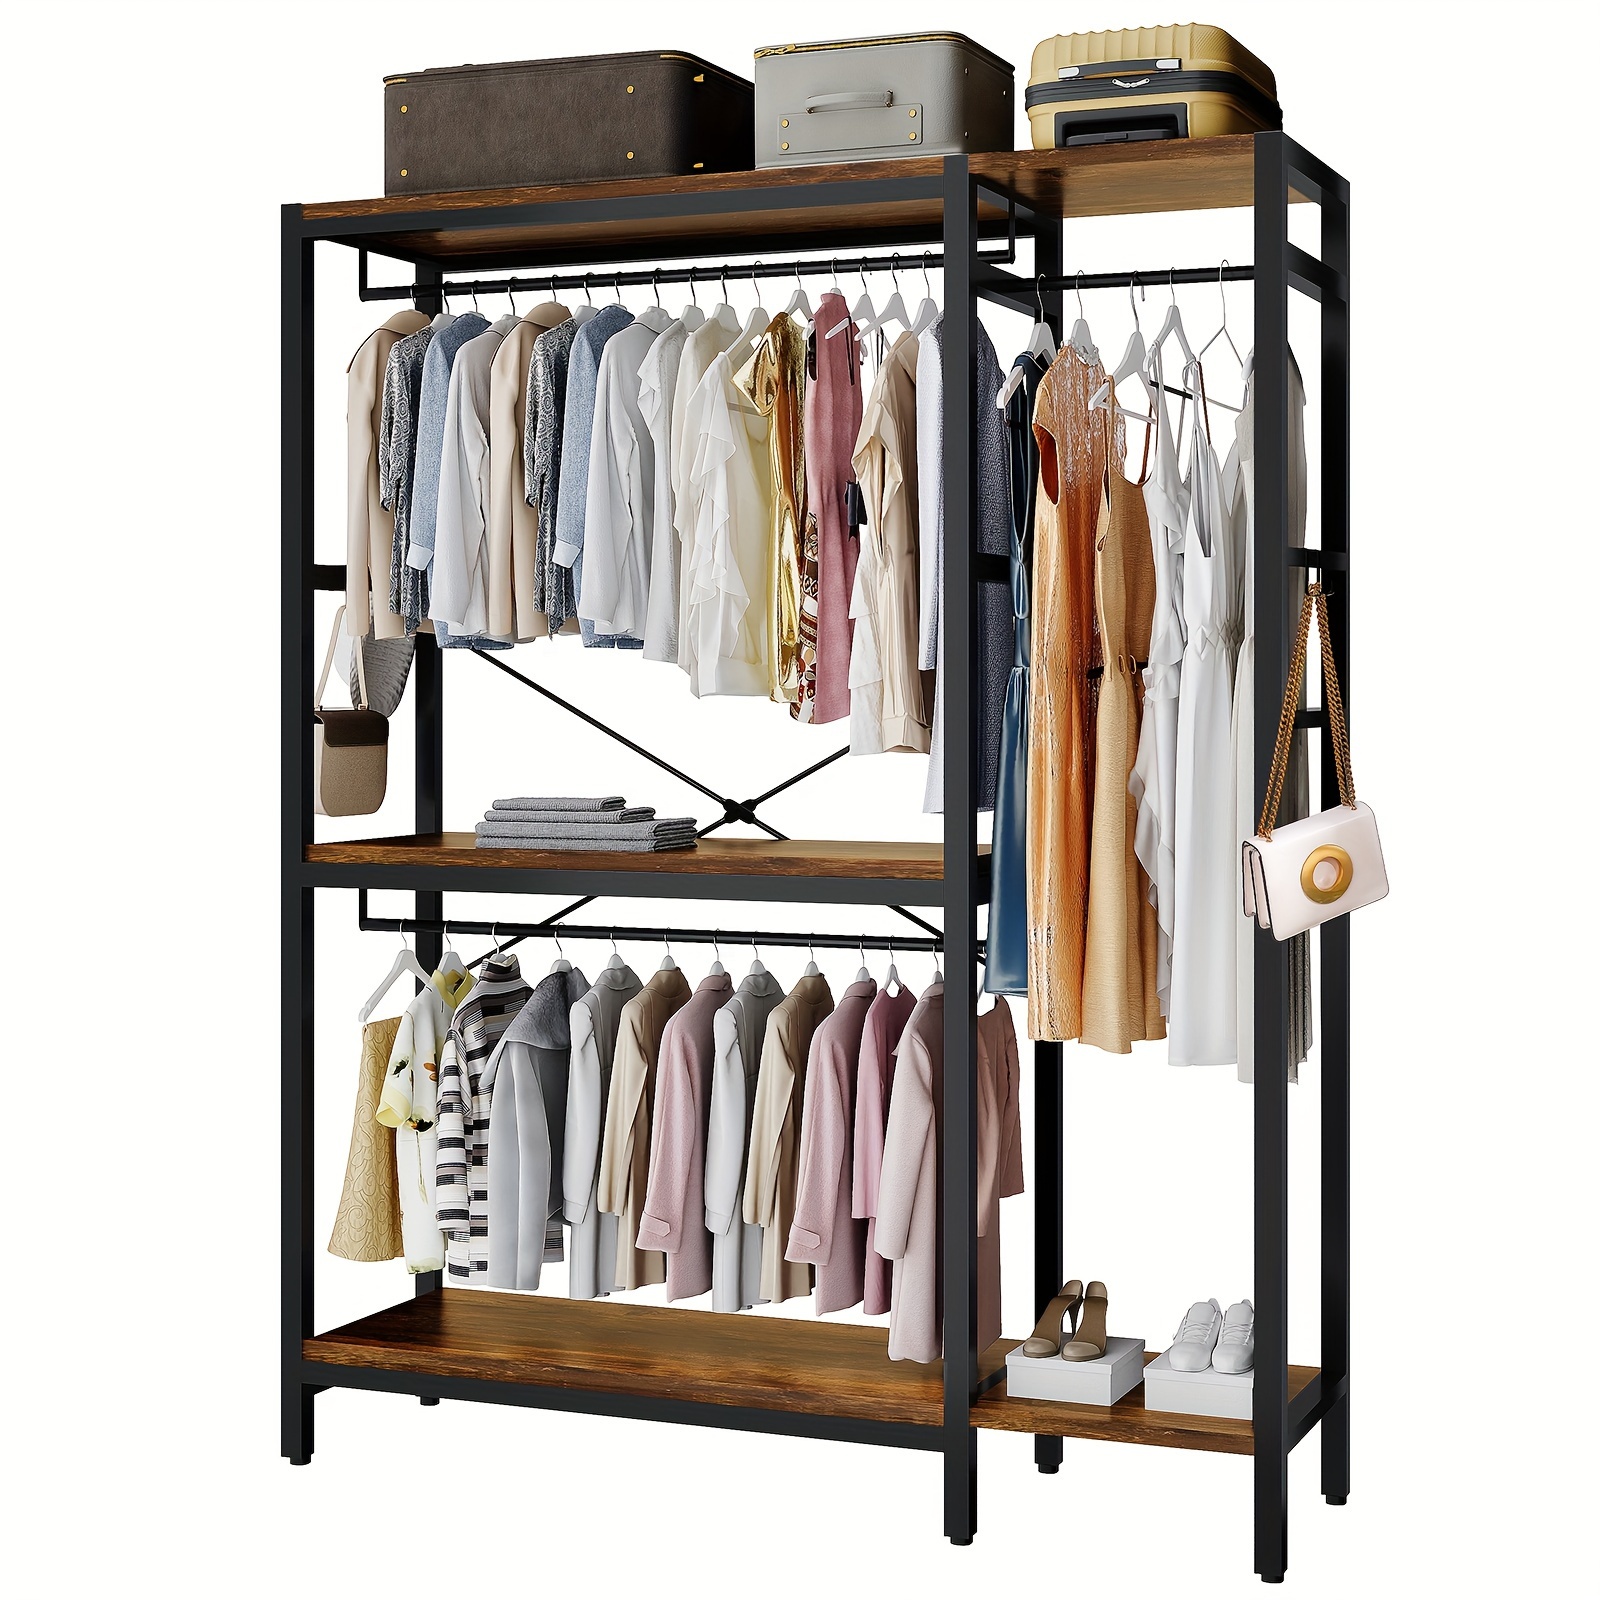 

Clothes Rack, Heavy Duty Garment Rack For Clothes, Clothing Racks With Shelves And 4 Side Hooks, Freestanding Metal Wooden Closet Organizer, Wardrobe Storage Rack, Brown